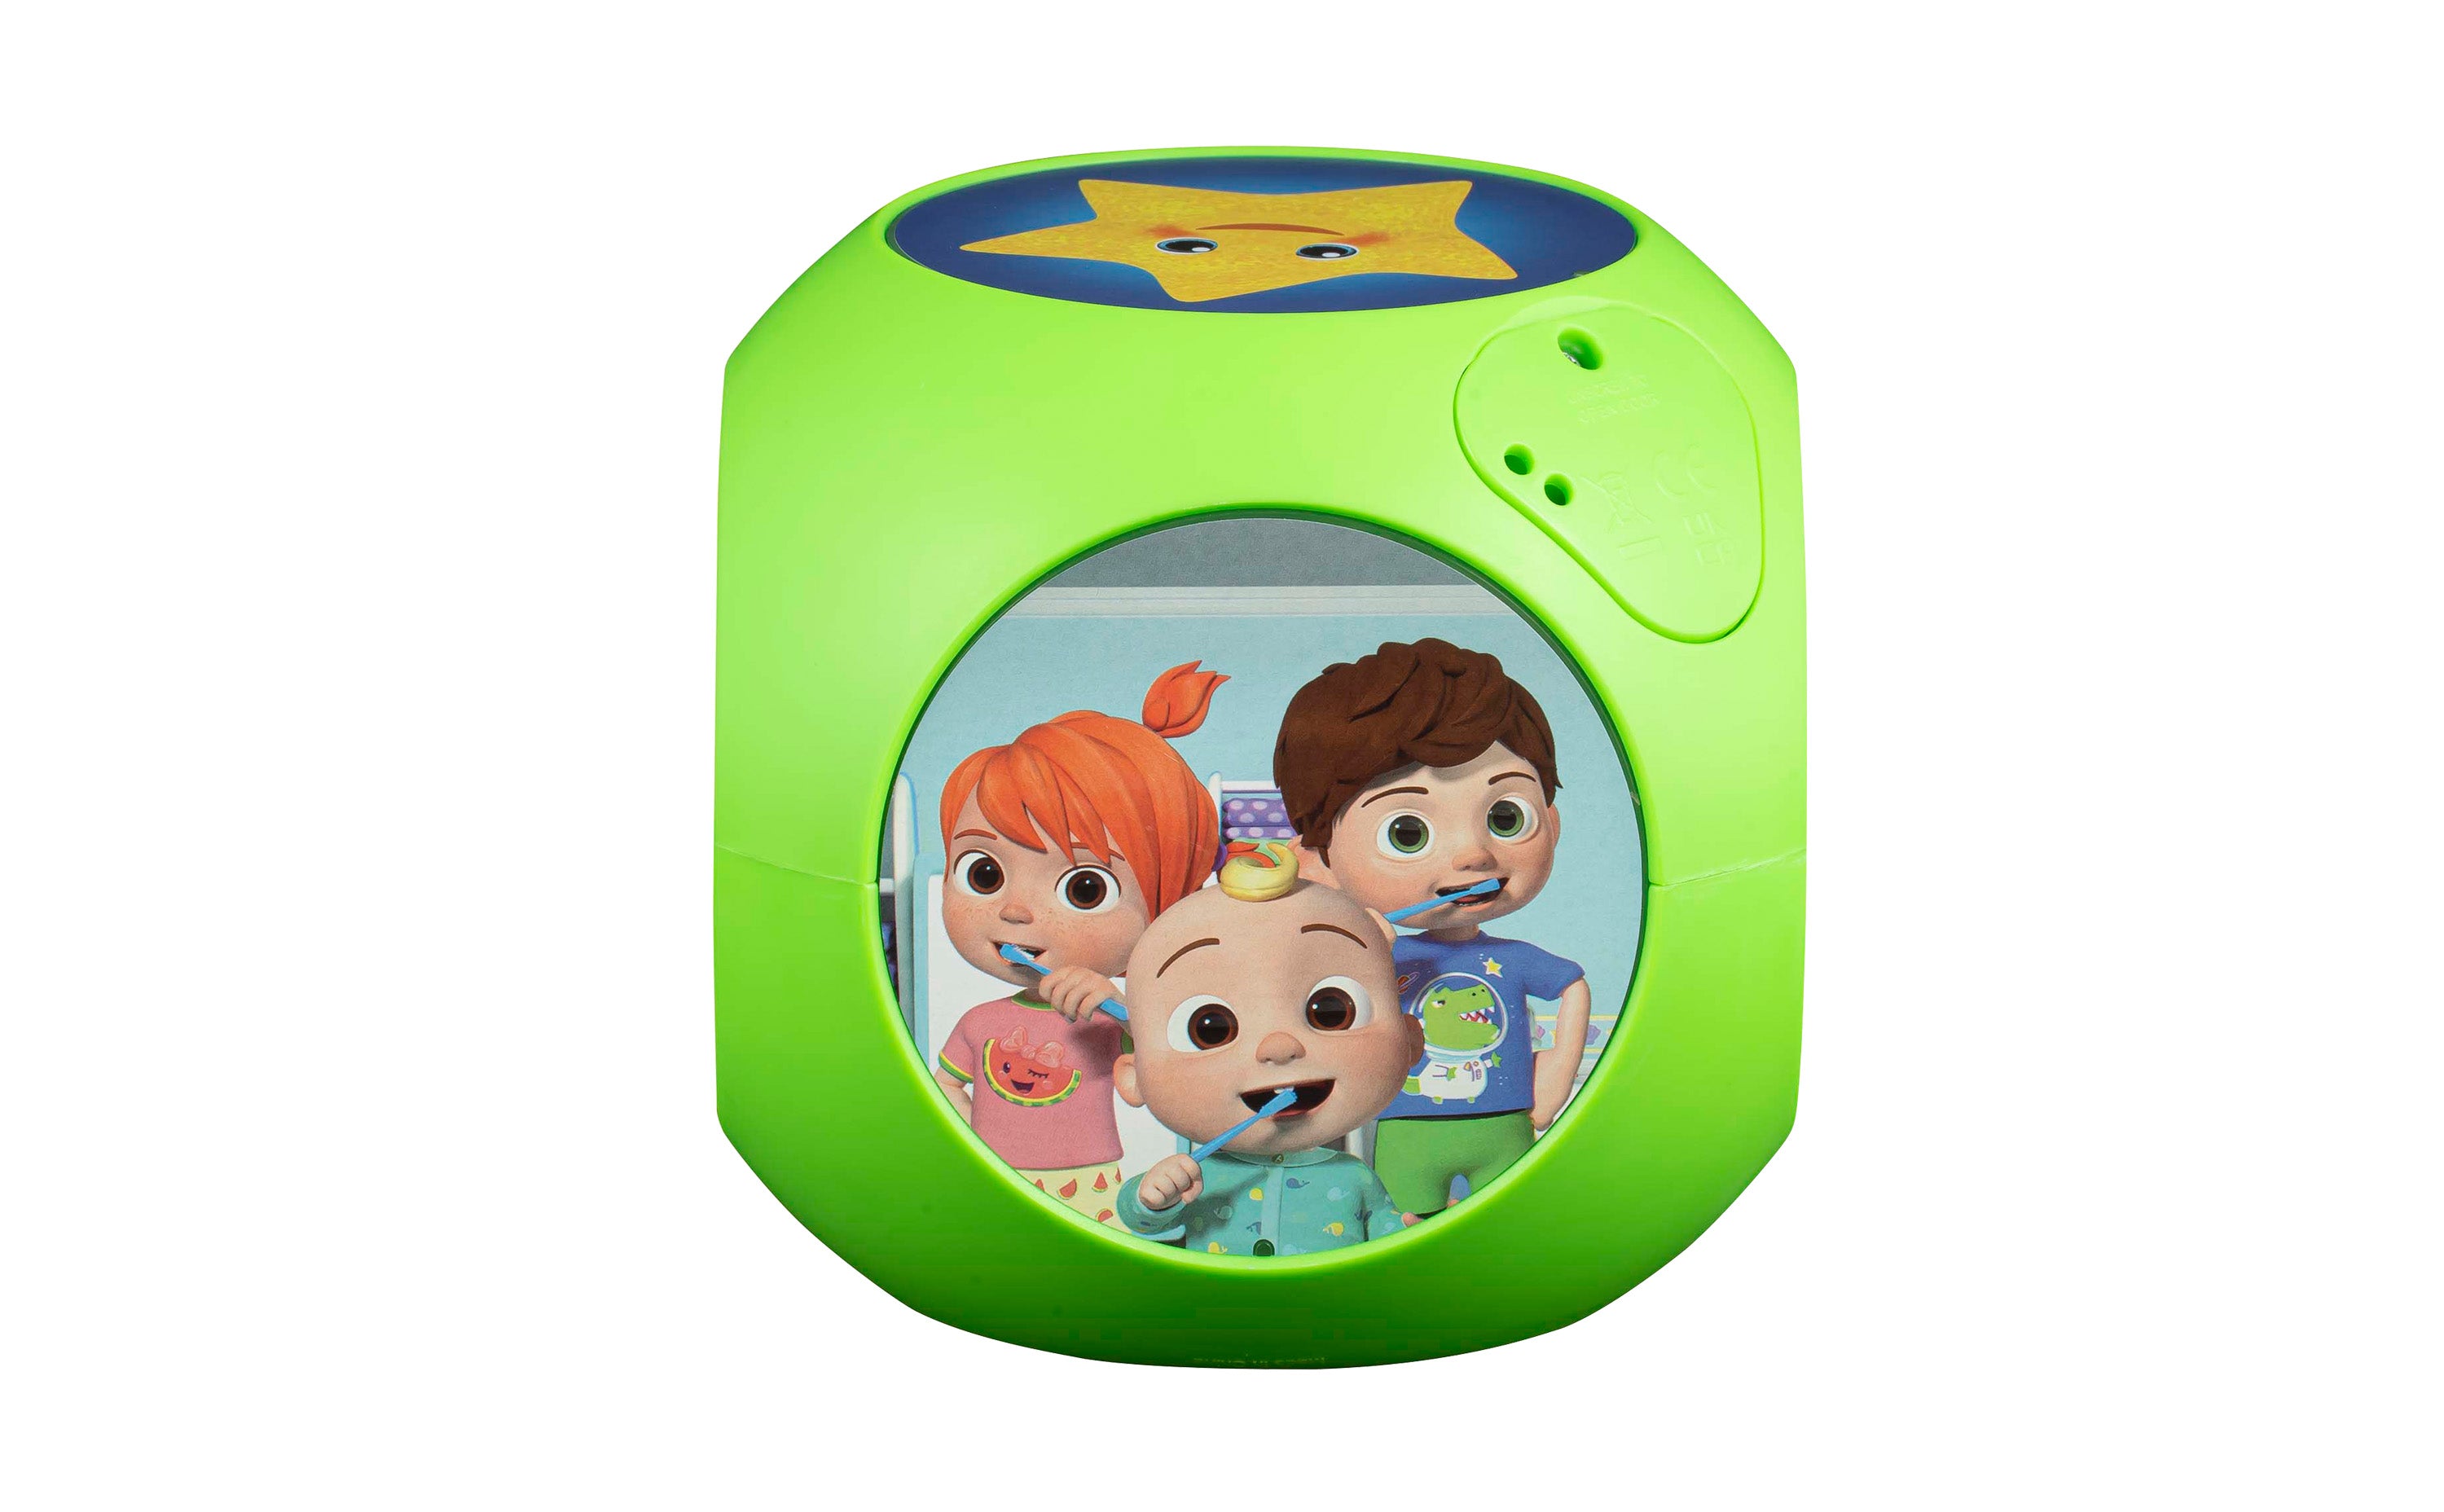 eKids Cocomelon Toy Music Player Includes Freeze Dance, Musical Toy for  Toddlers with Built-in Nursery Rhymes for Fans of Cocomelon Toys and Gifts  for Boys and Girls 